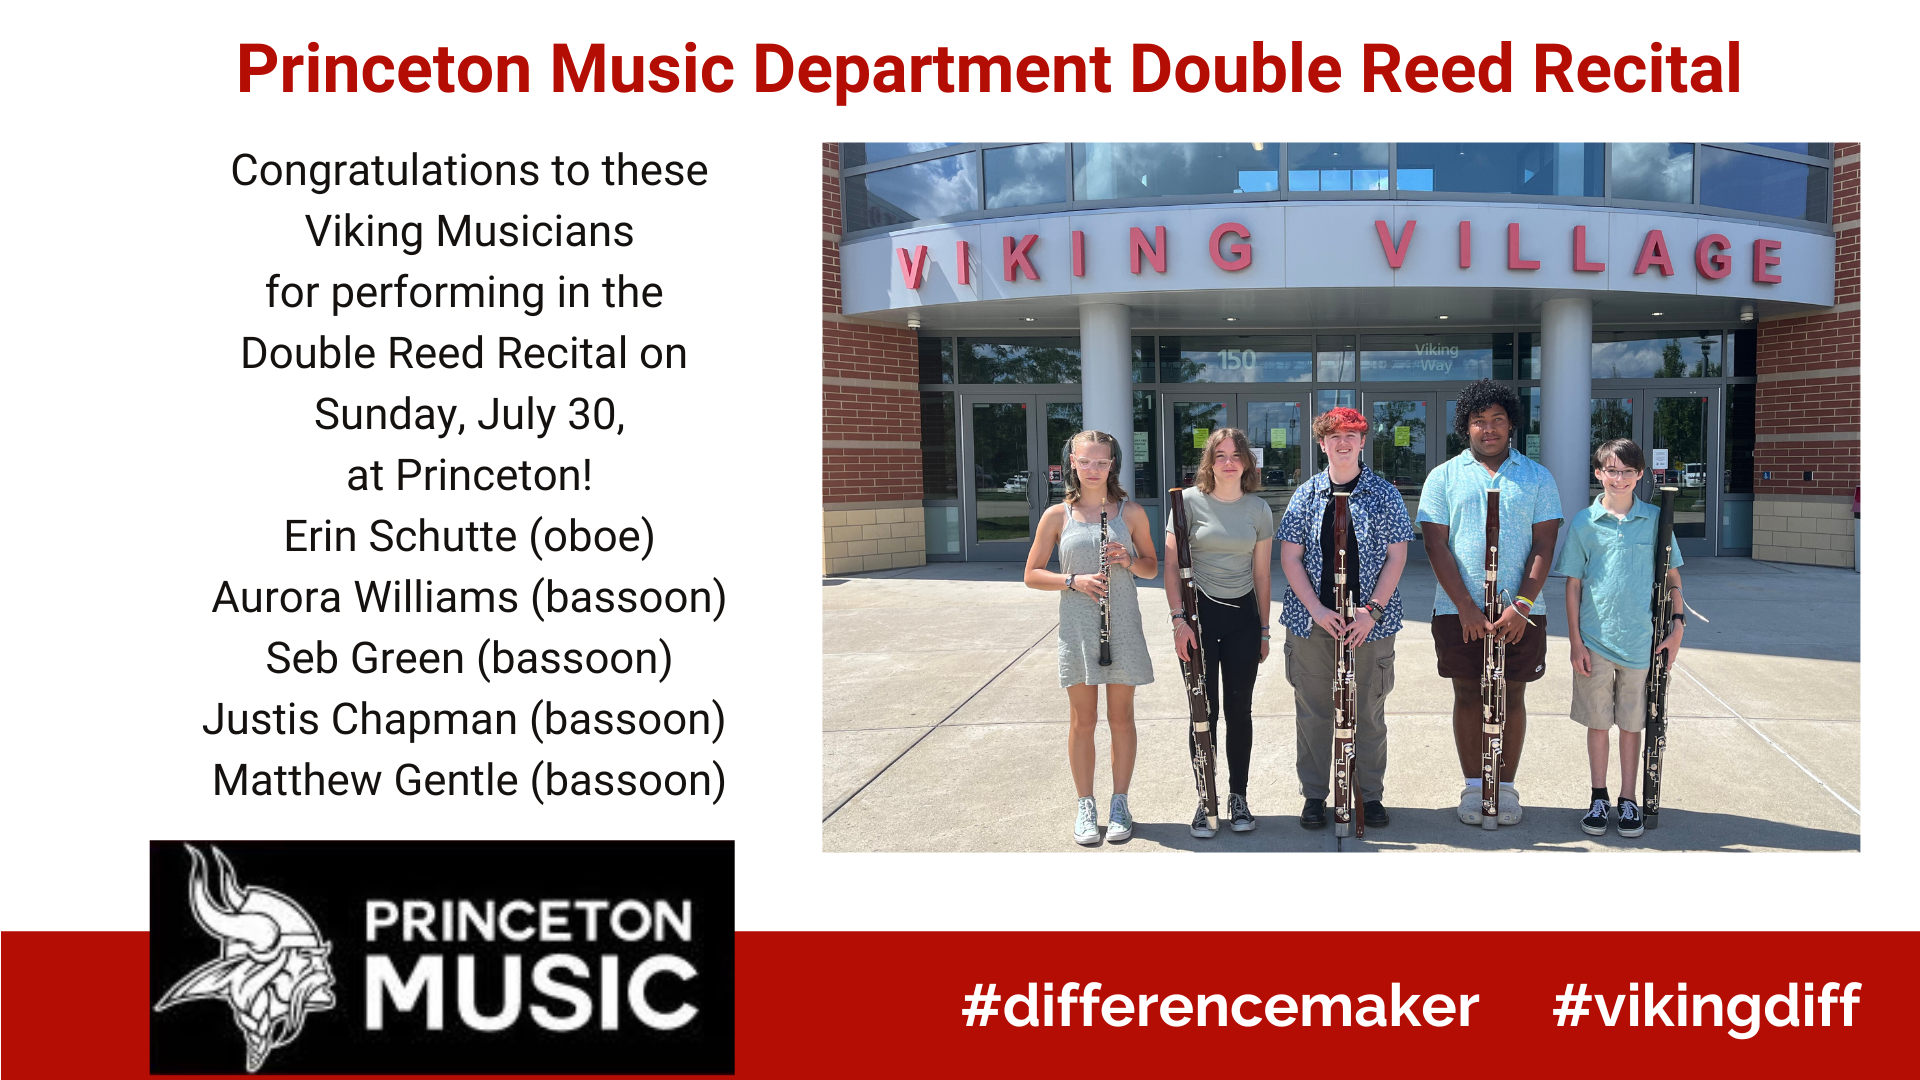 Congratulations to these Viking Musicians for performing in the Double Reed Recital on Sunday, July 30, at Princeton! (left to right) Erin Schutte (oboe), Aurora Williams (bassoon), Seb Green (bassoon), Justis Chapman (bassoon), Matthew Gentle (bassoon)